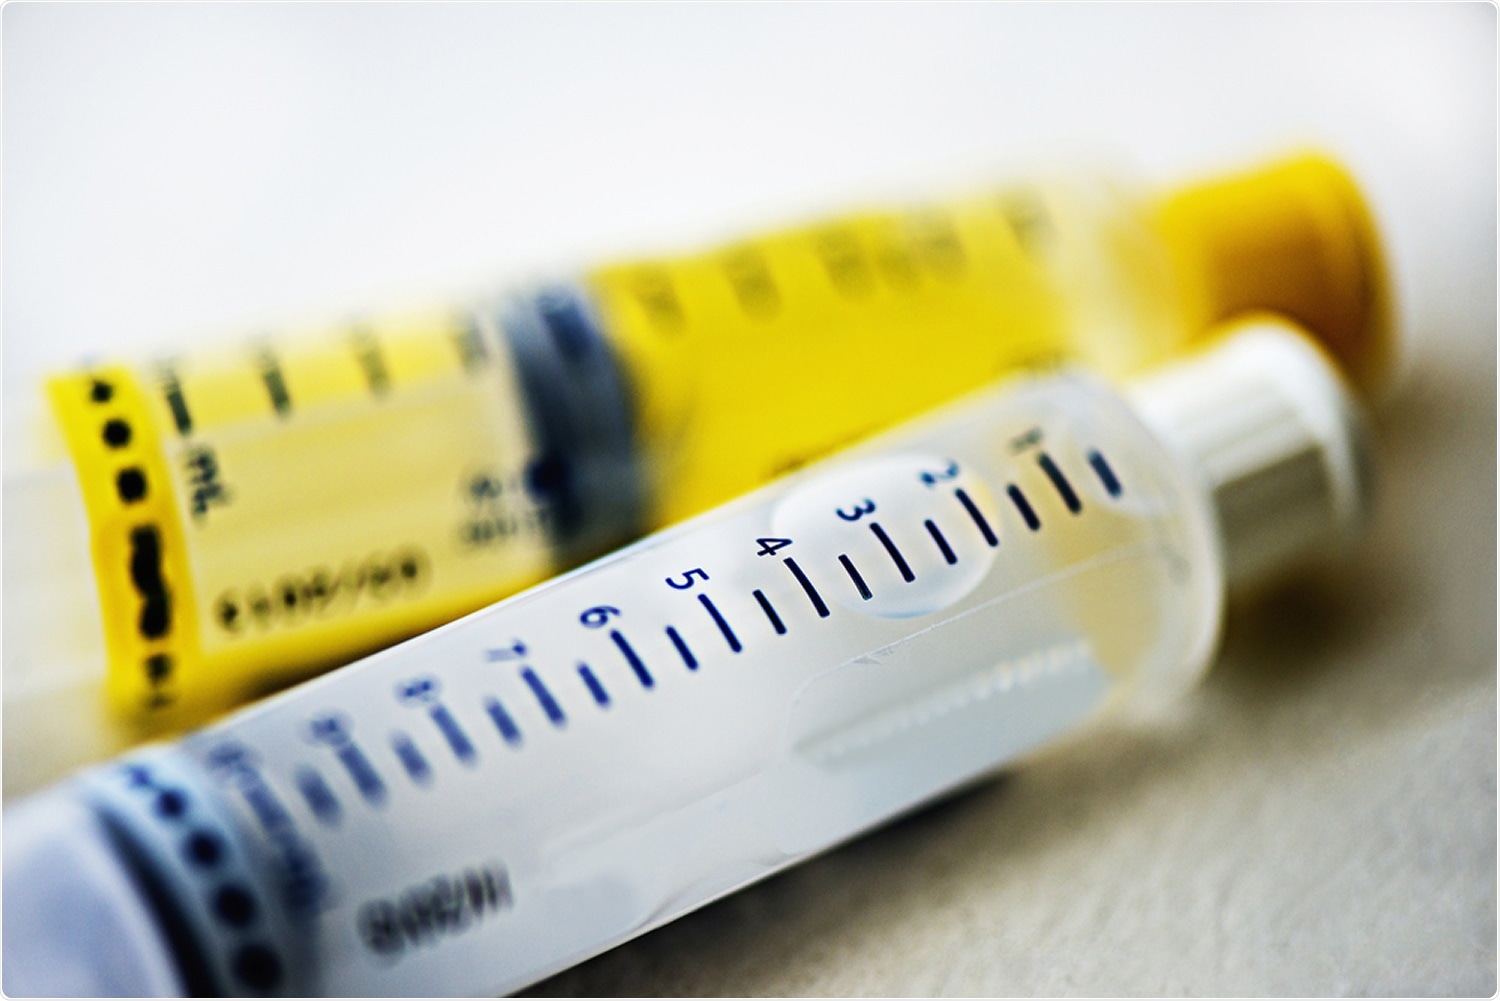 Study: Heparin for Moderately Ill Patients with Covid-19. Image Credit: Fuller Photography / Shutterstock